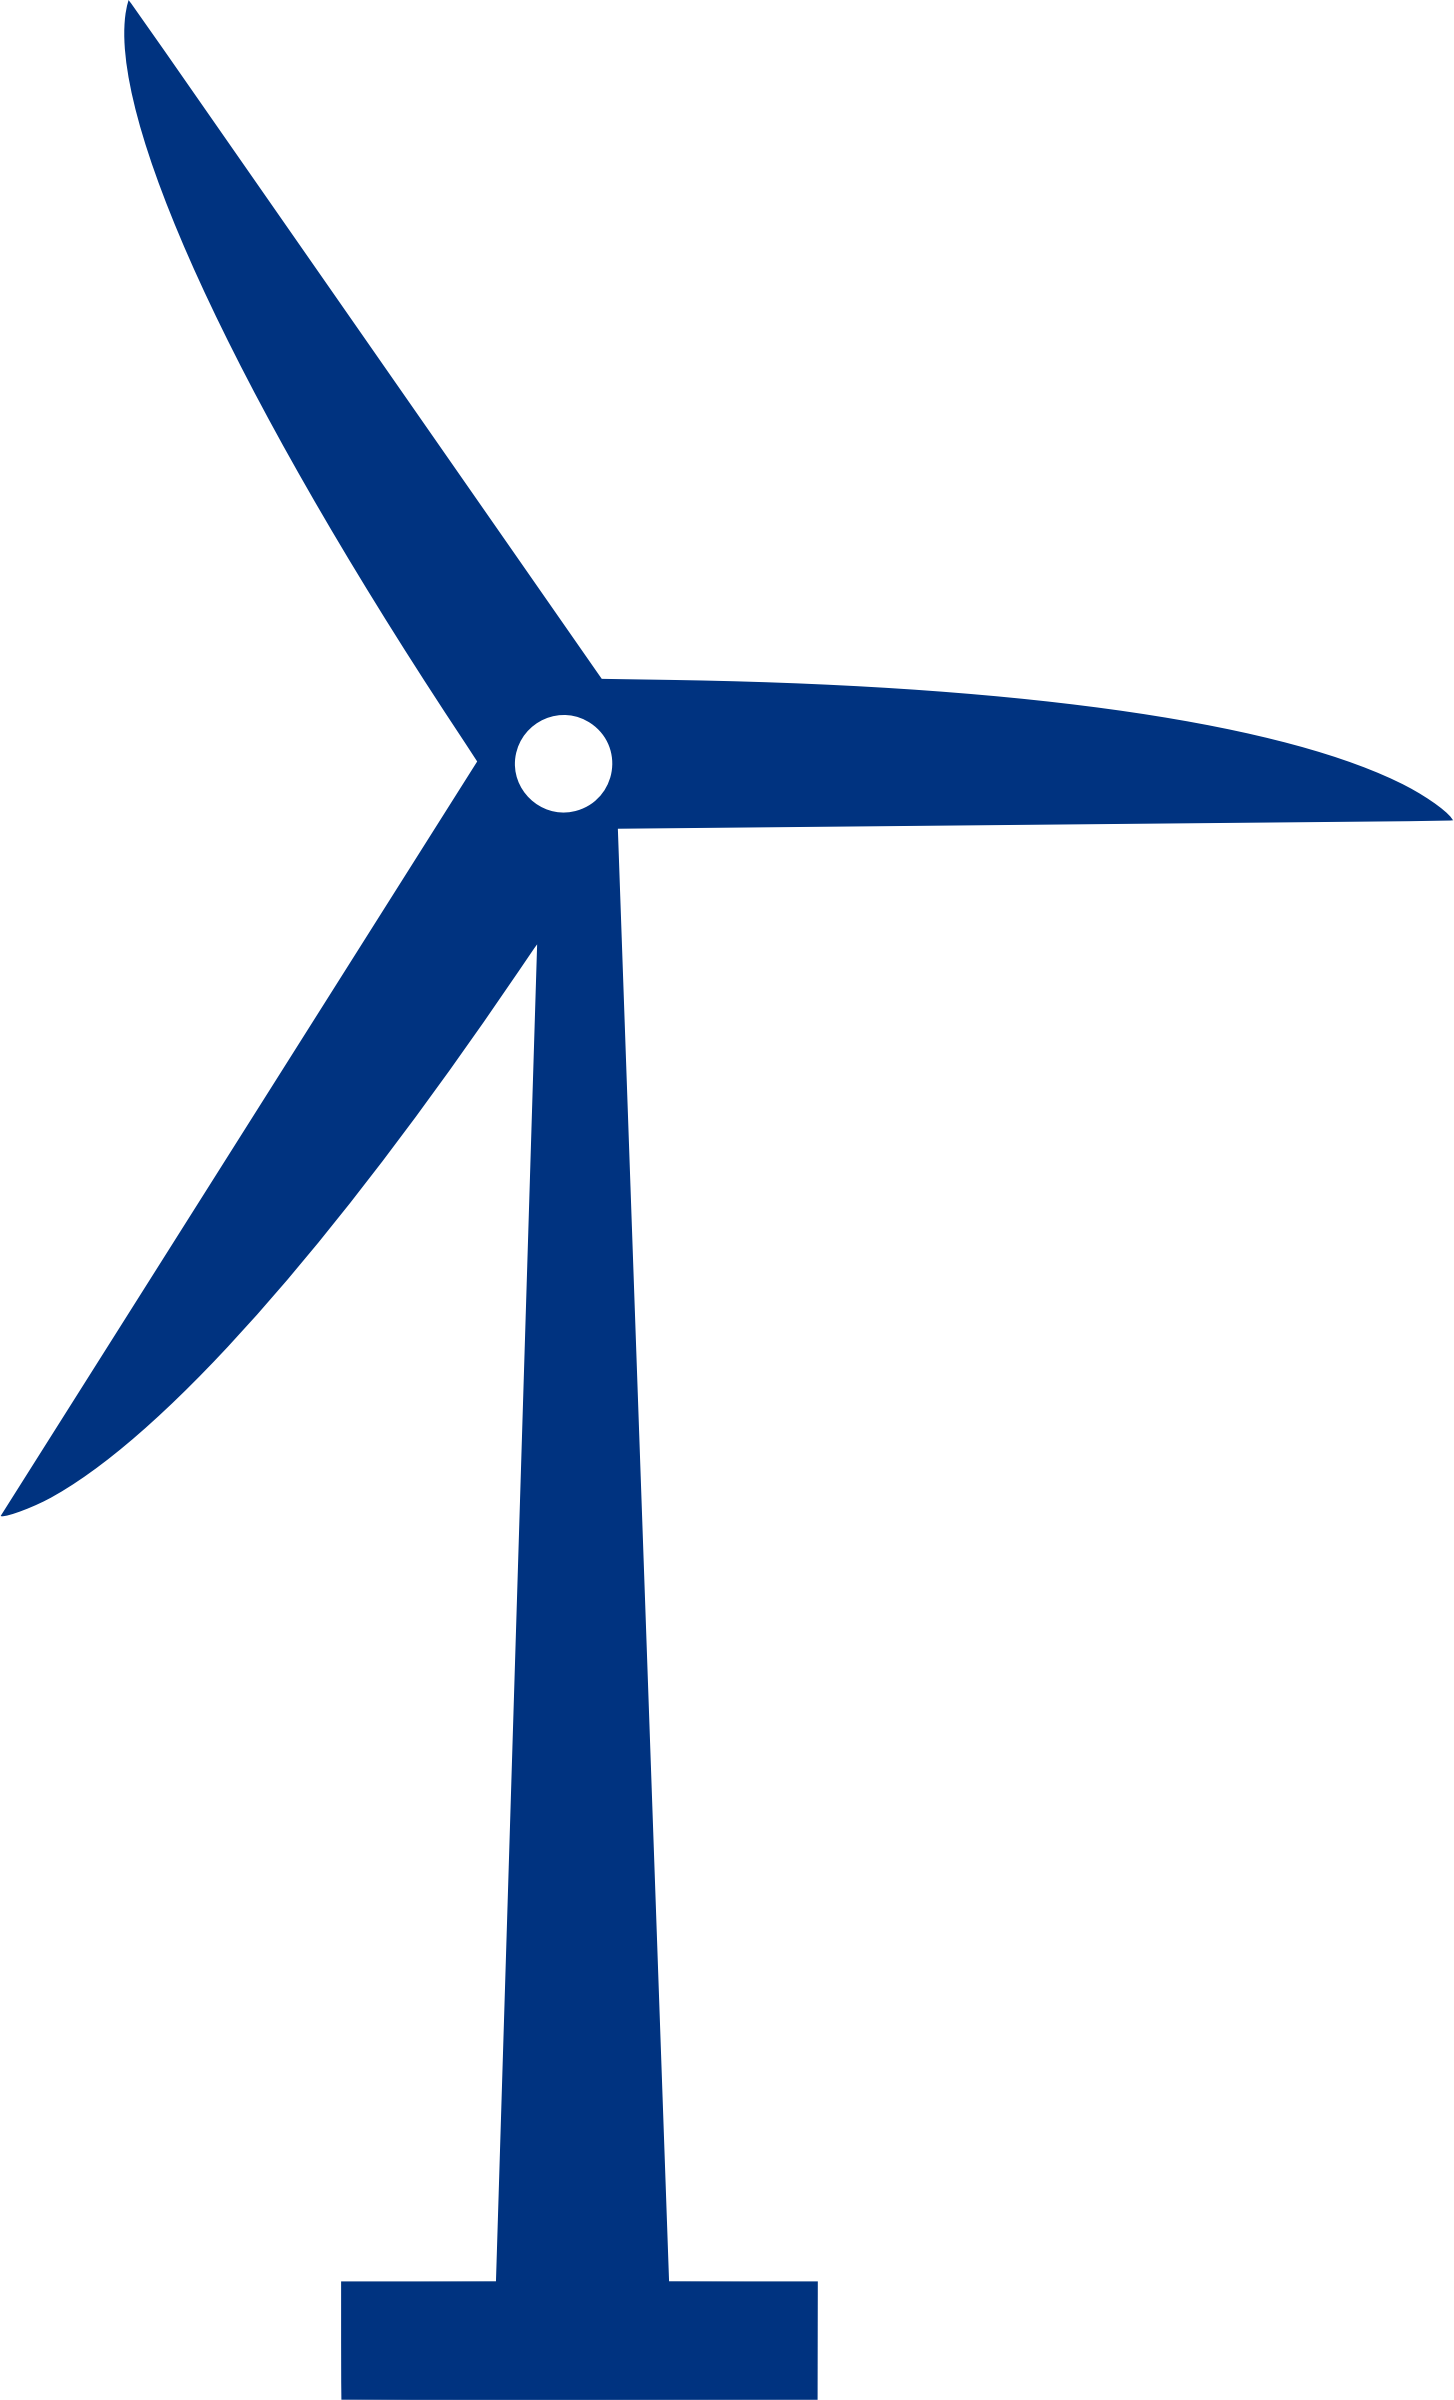 Energy clipart windfarm, Energy windfarm Transparent FREE for download